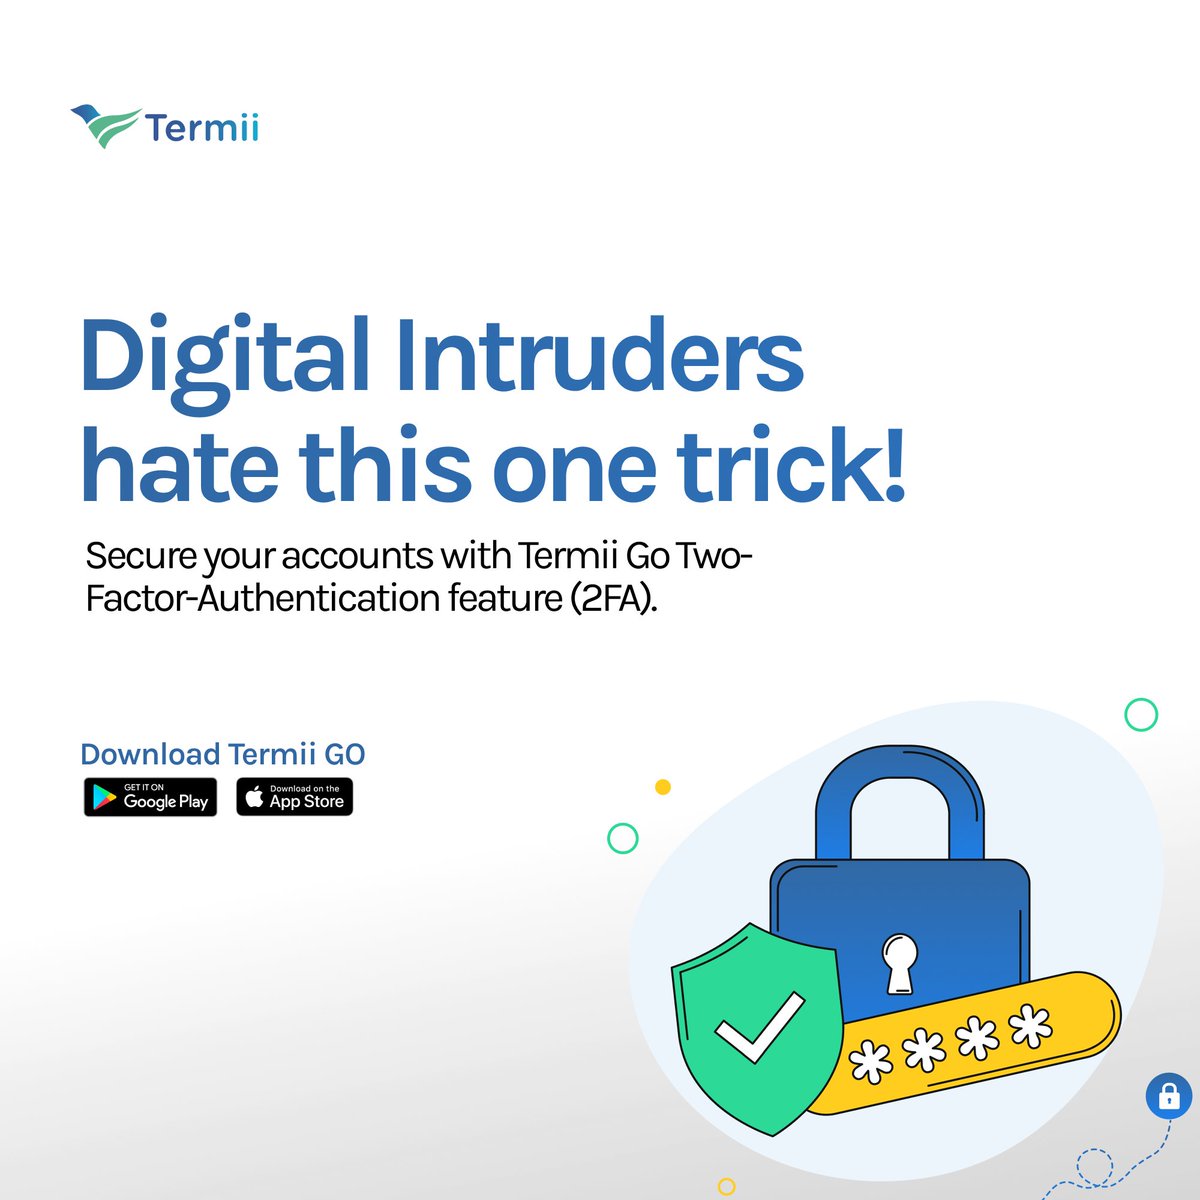 It's Friday! Don't forget to secure your login with Termii Go's 2FA feature. Prevent unauthorized access and keep your data safe and secure.

#TermiiGo #SecurityConversation #OnlineSafety #TwoFactorAuthentication